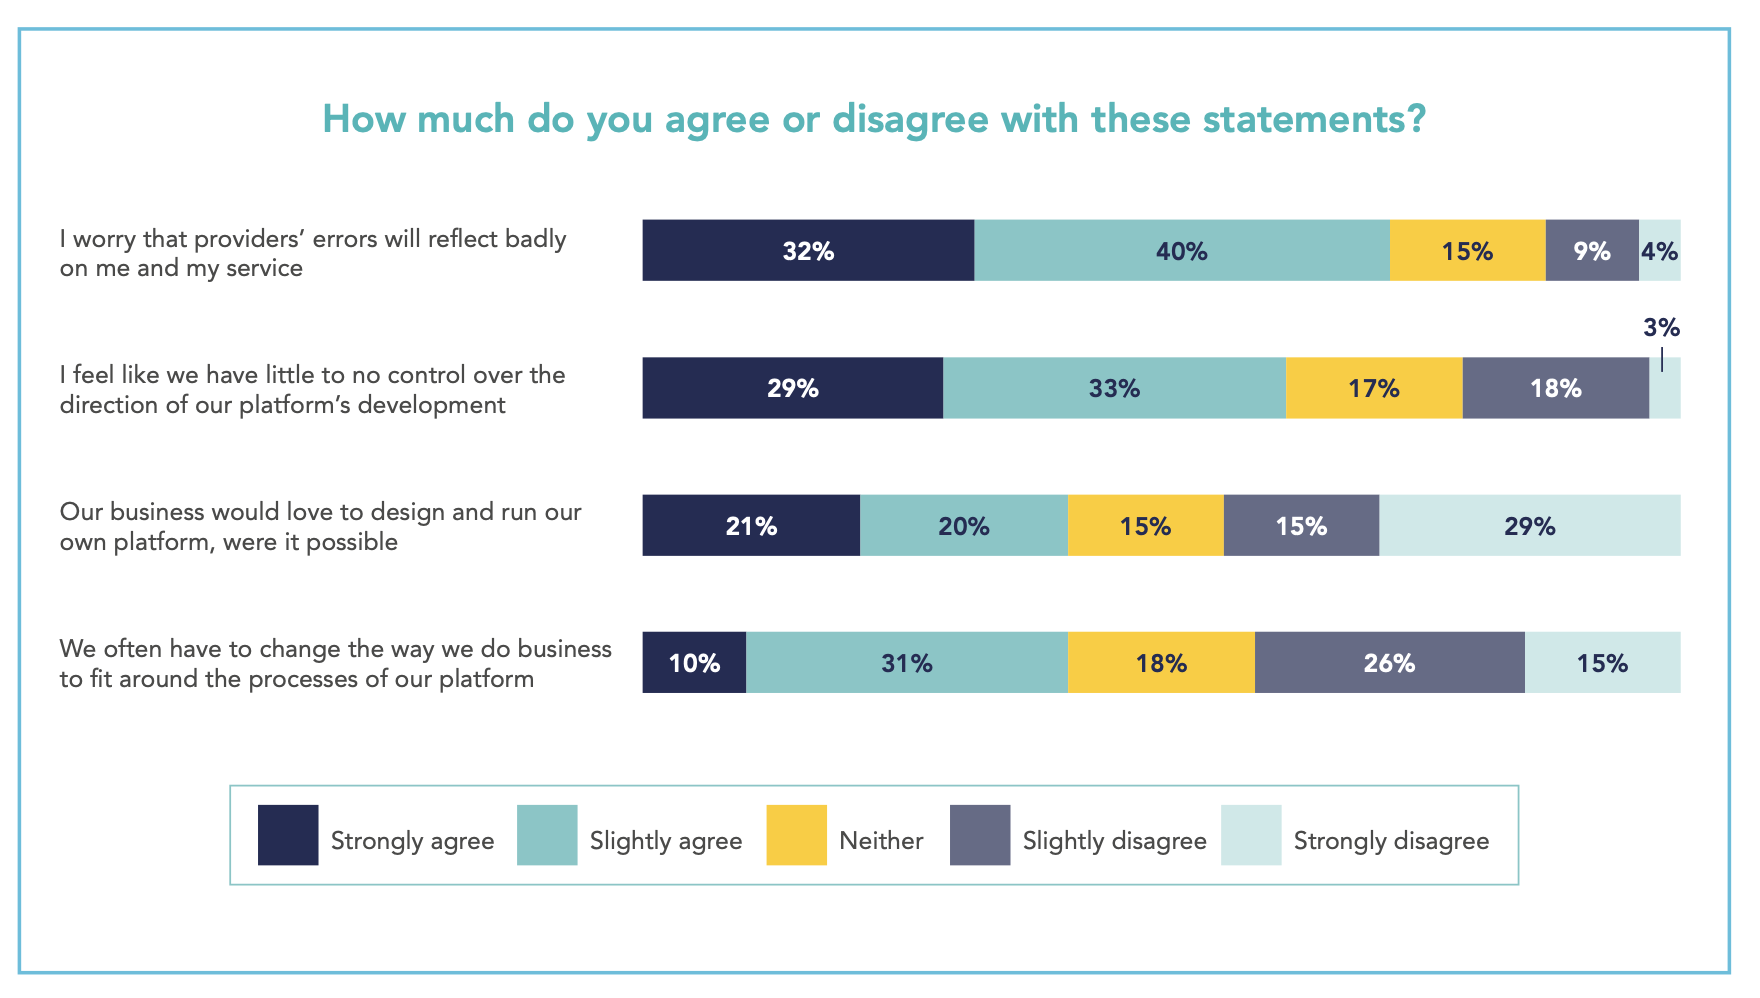 Lots of advisers worry that providers’ errors will reflect badly on their service